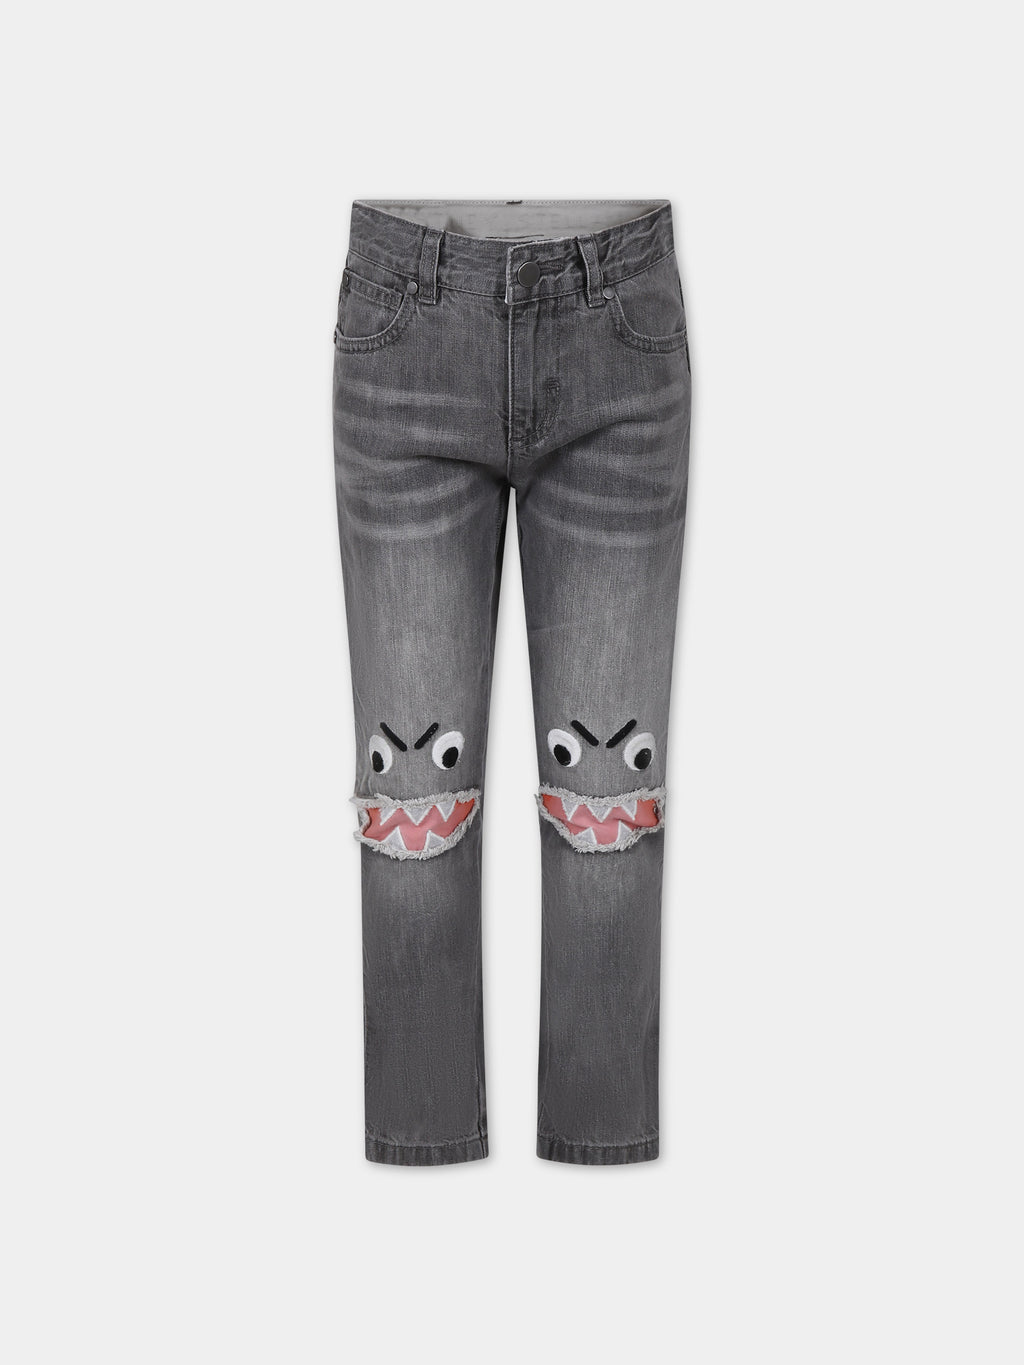 Grey jeans for boy with shark